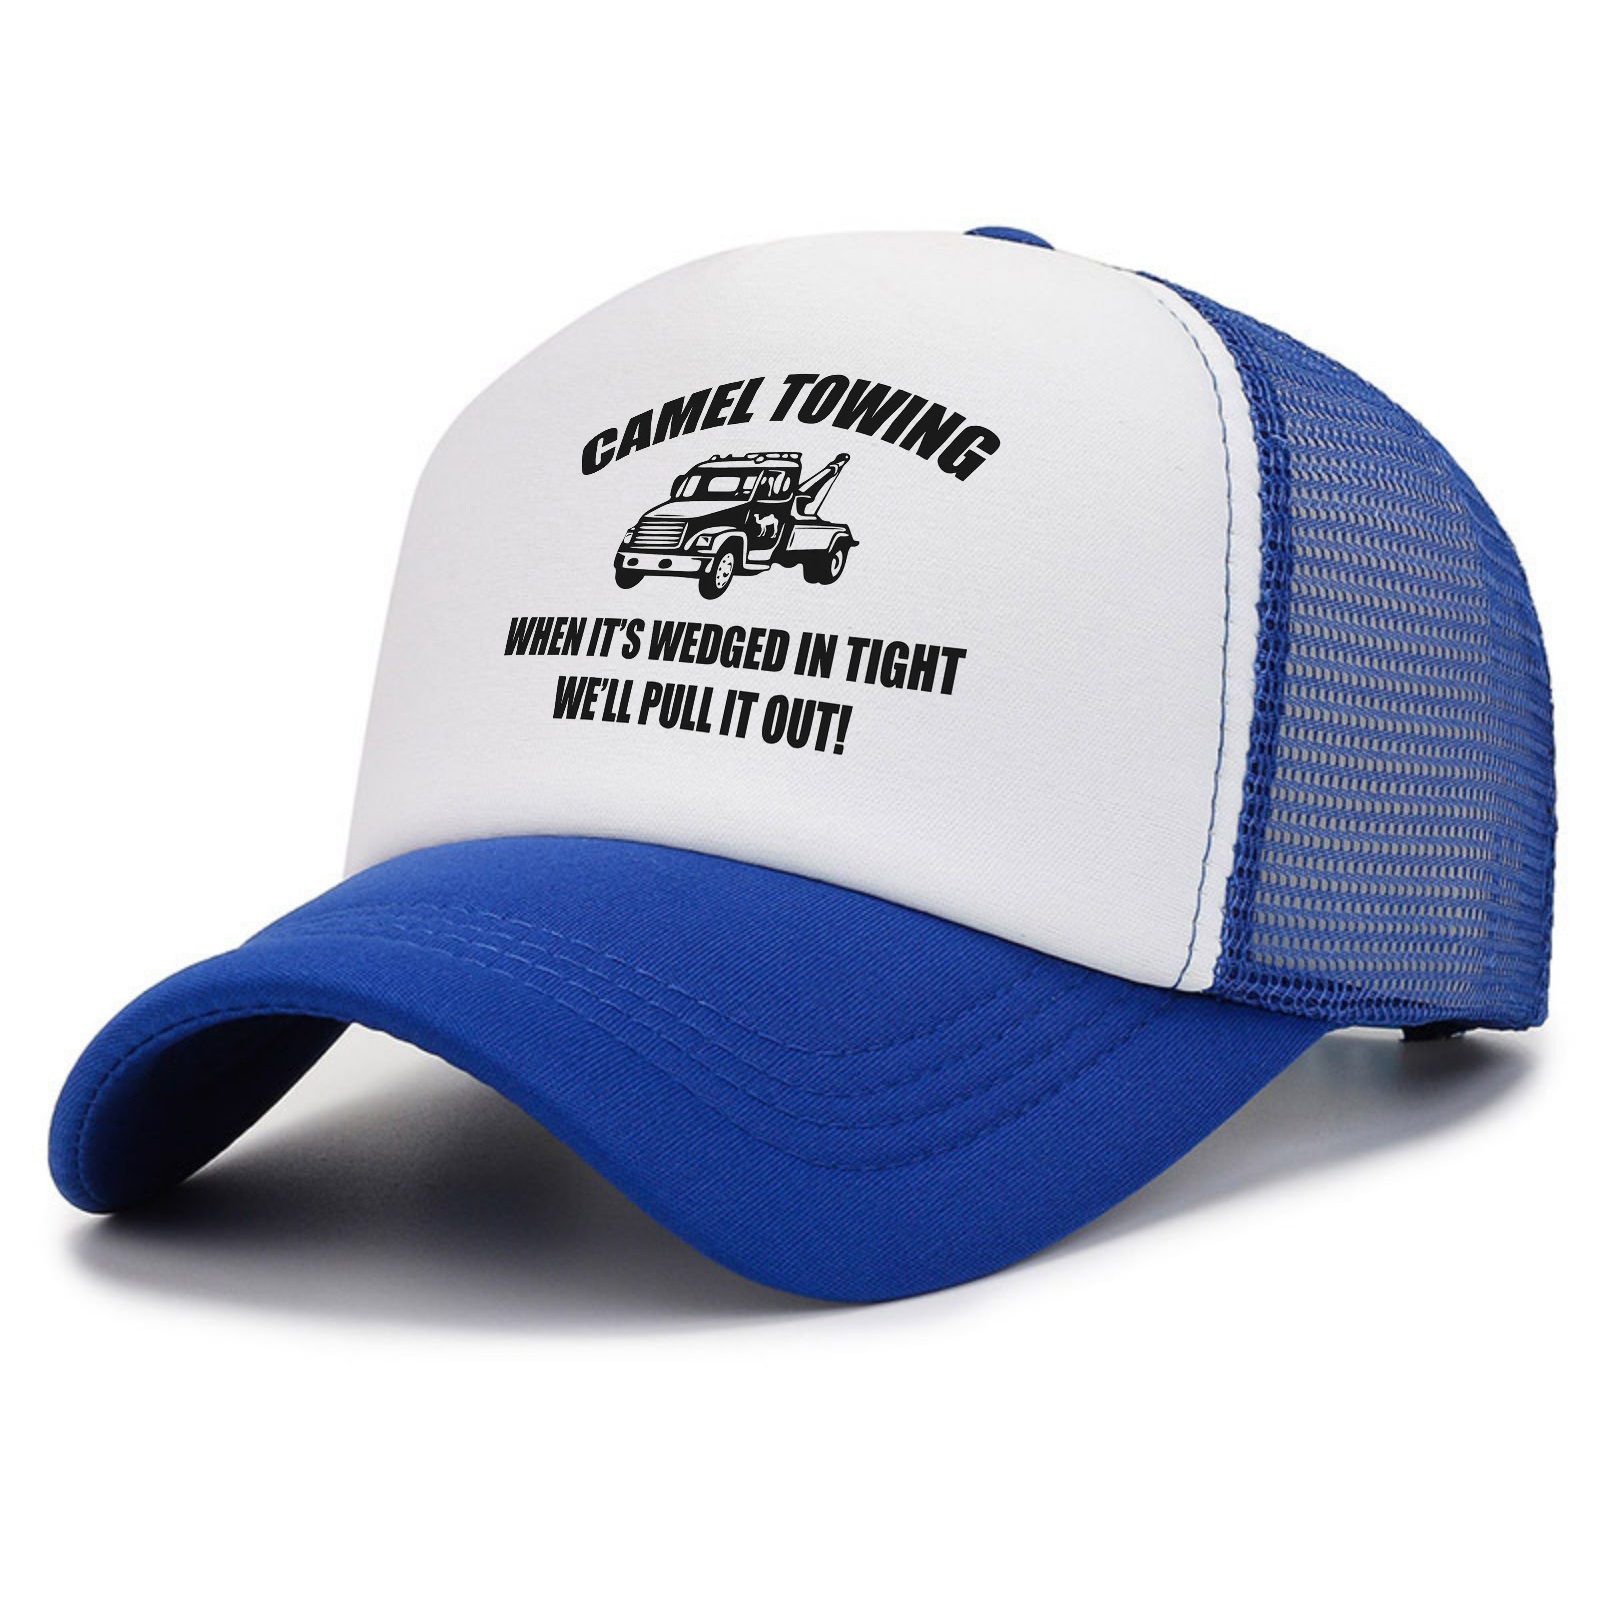 Black Trucker Hats for Men Me and Women's Summer Fashion Casual